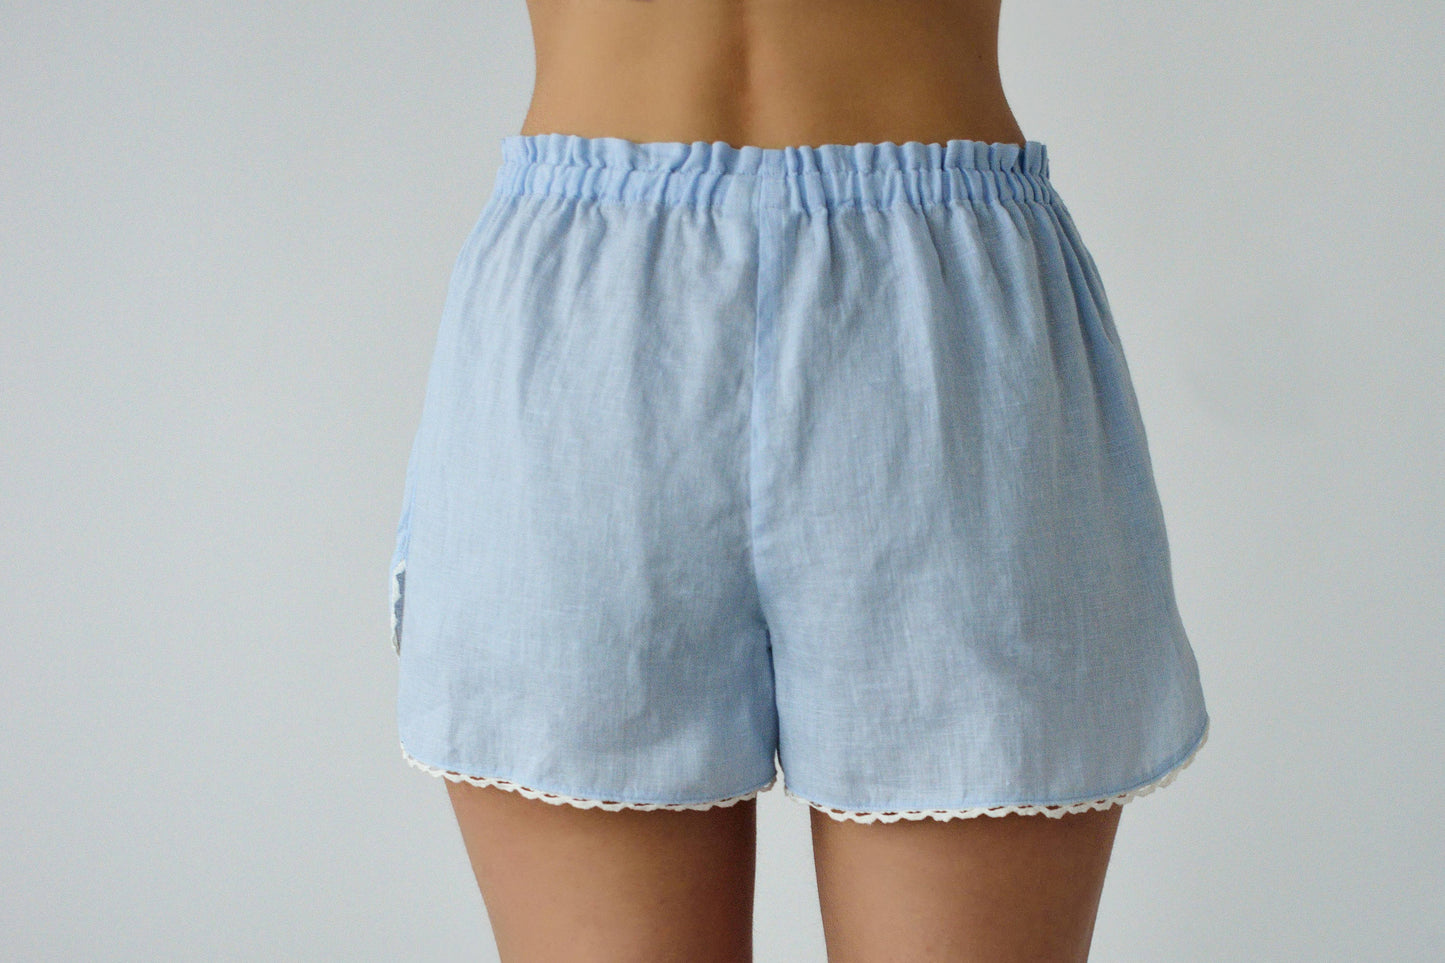 Linen Sleep Shorts ROSIE with Lace for Woman